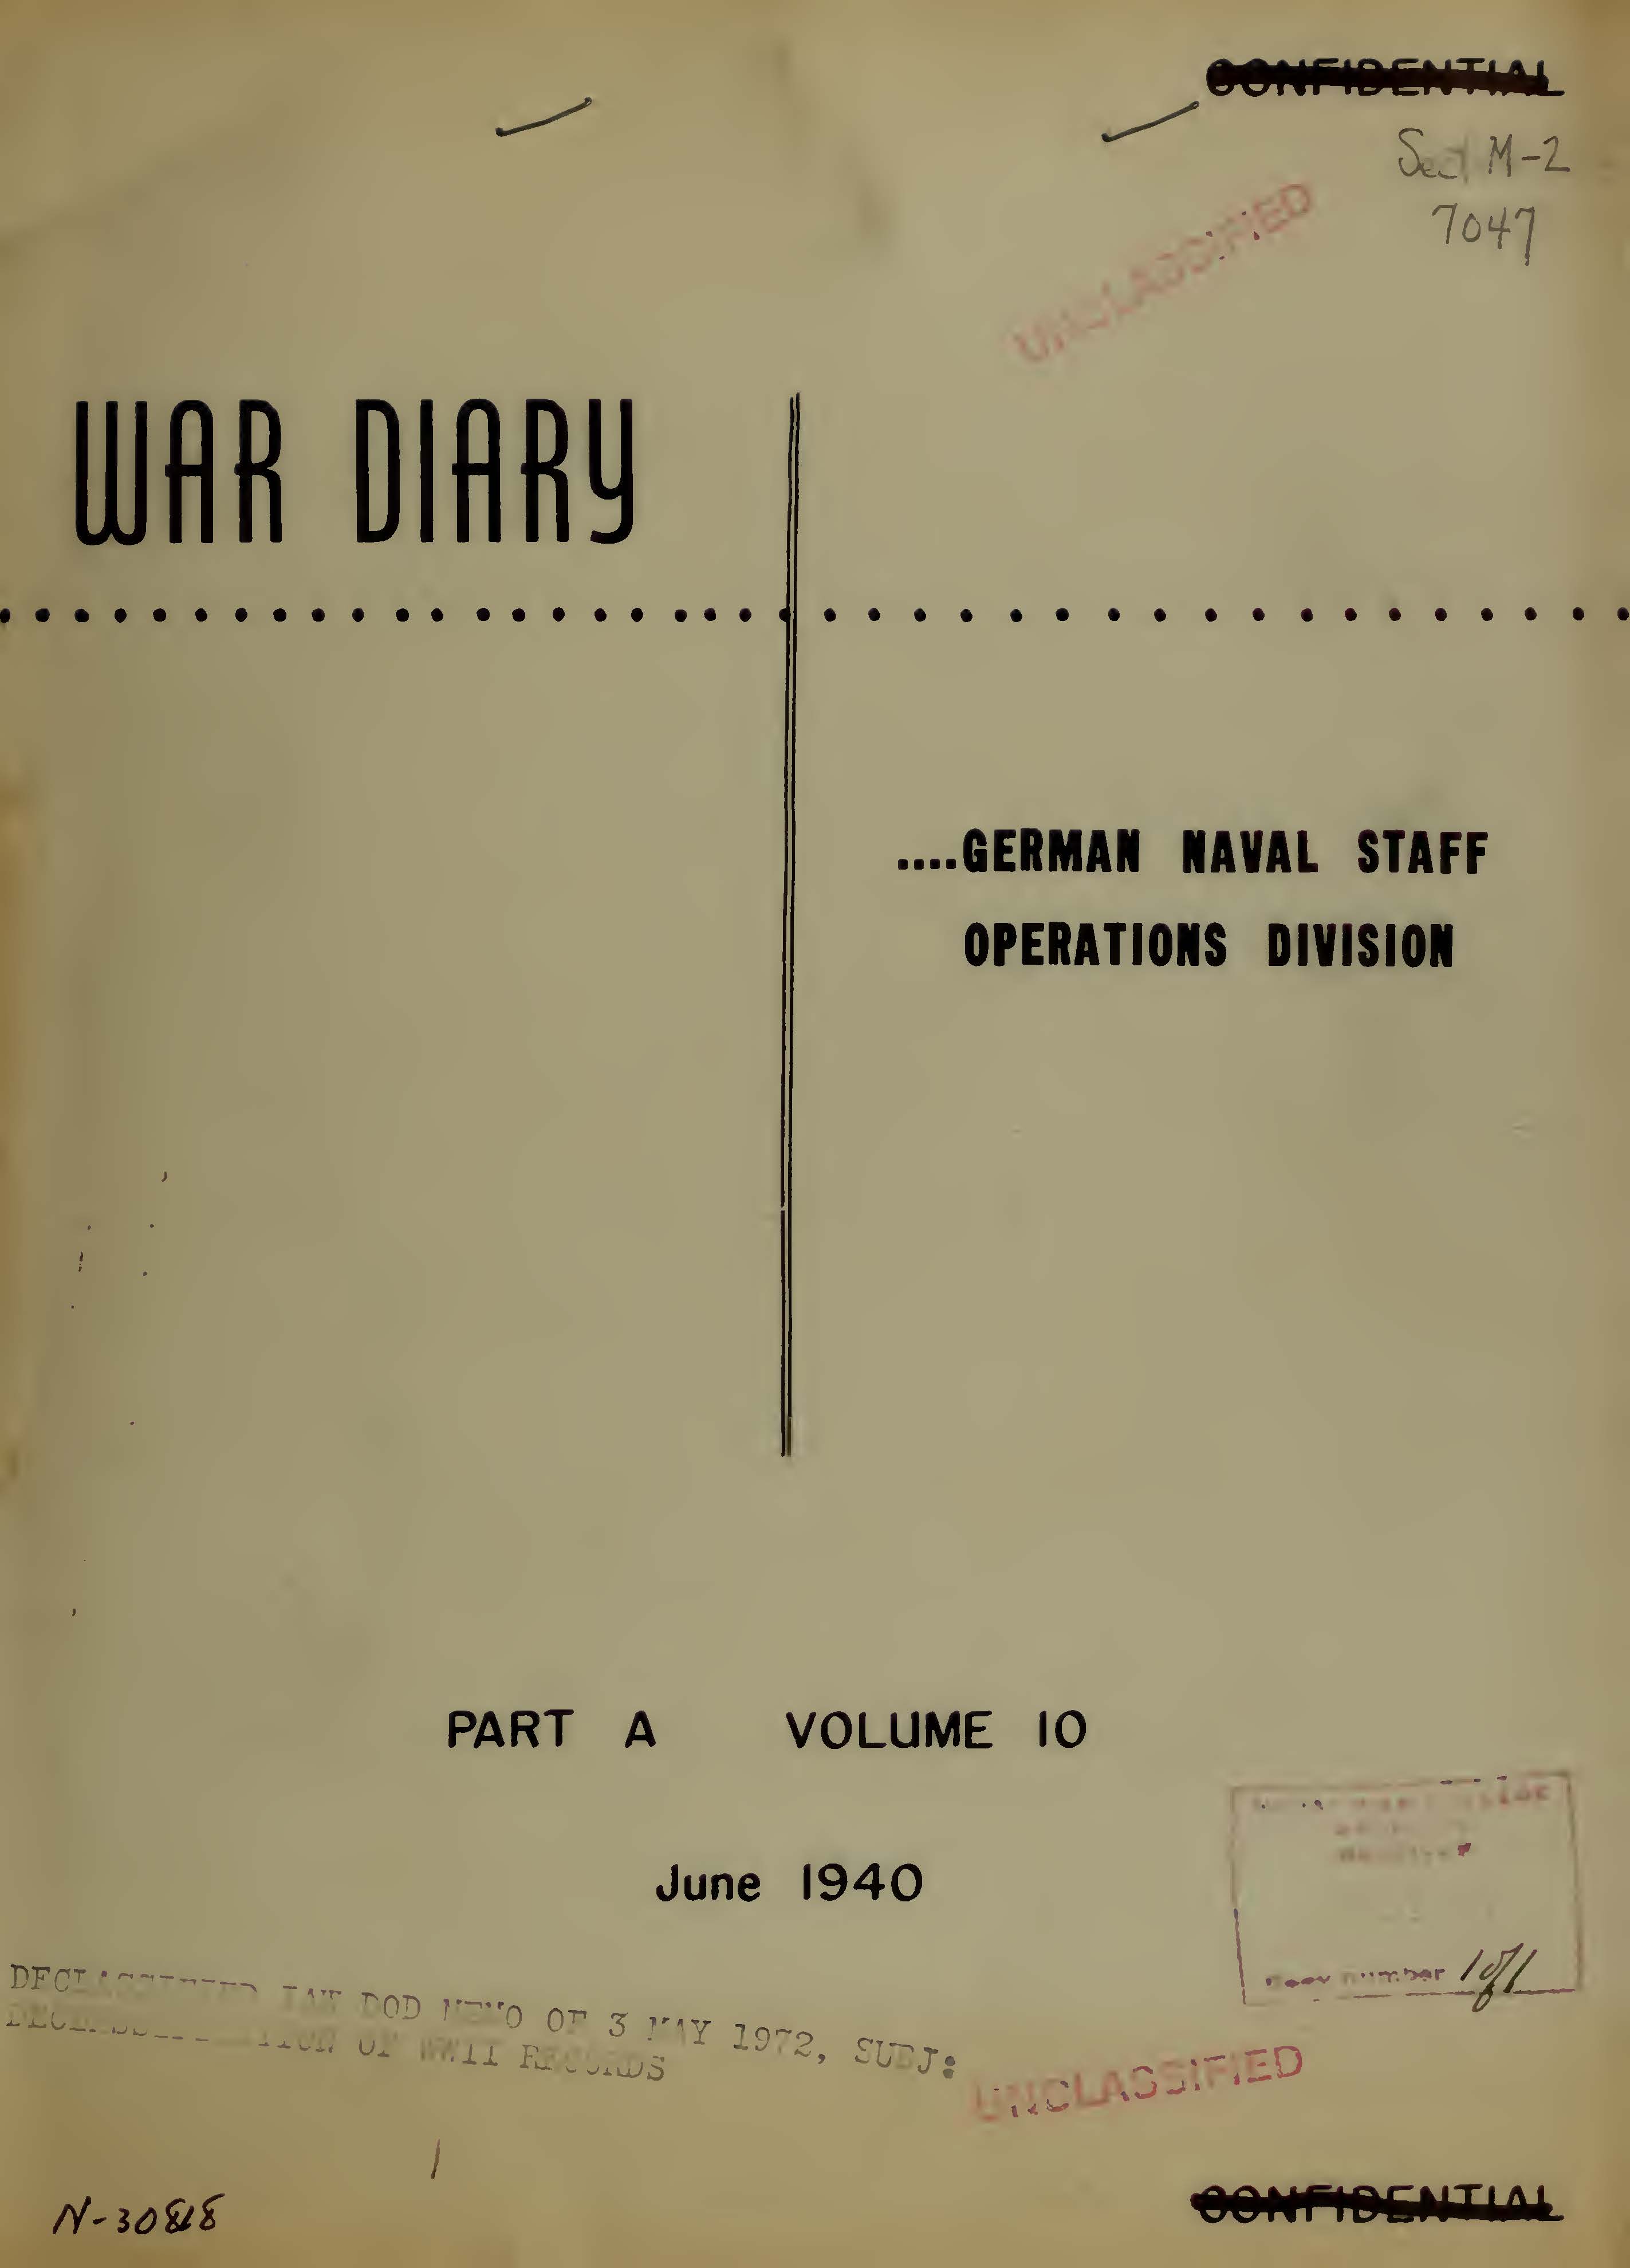 War Diary of German Naval Staff (Operations Division) Part A, Volume 10, June 1940